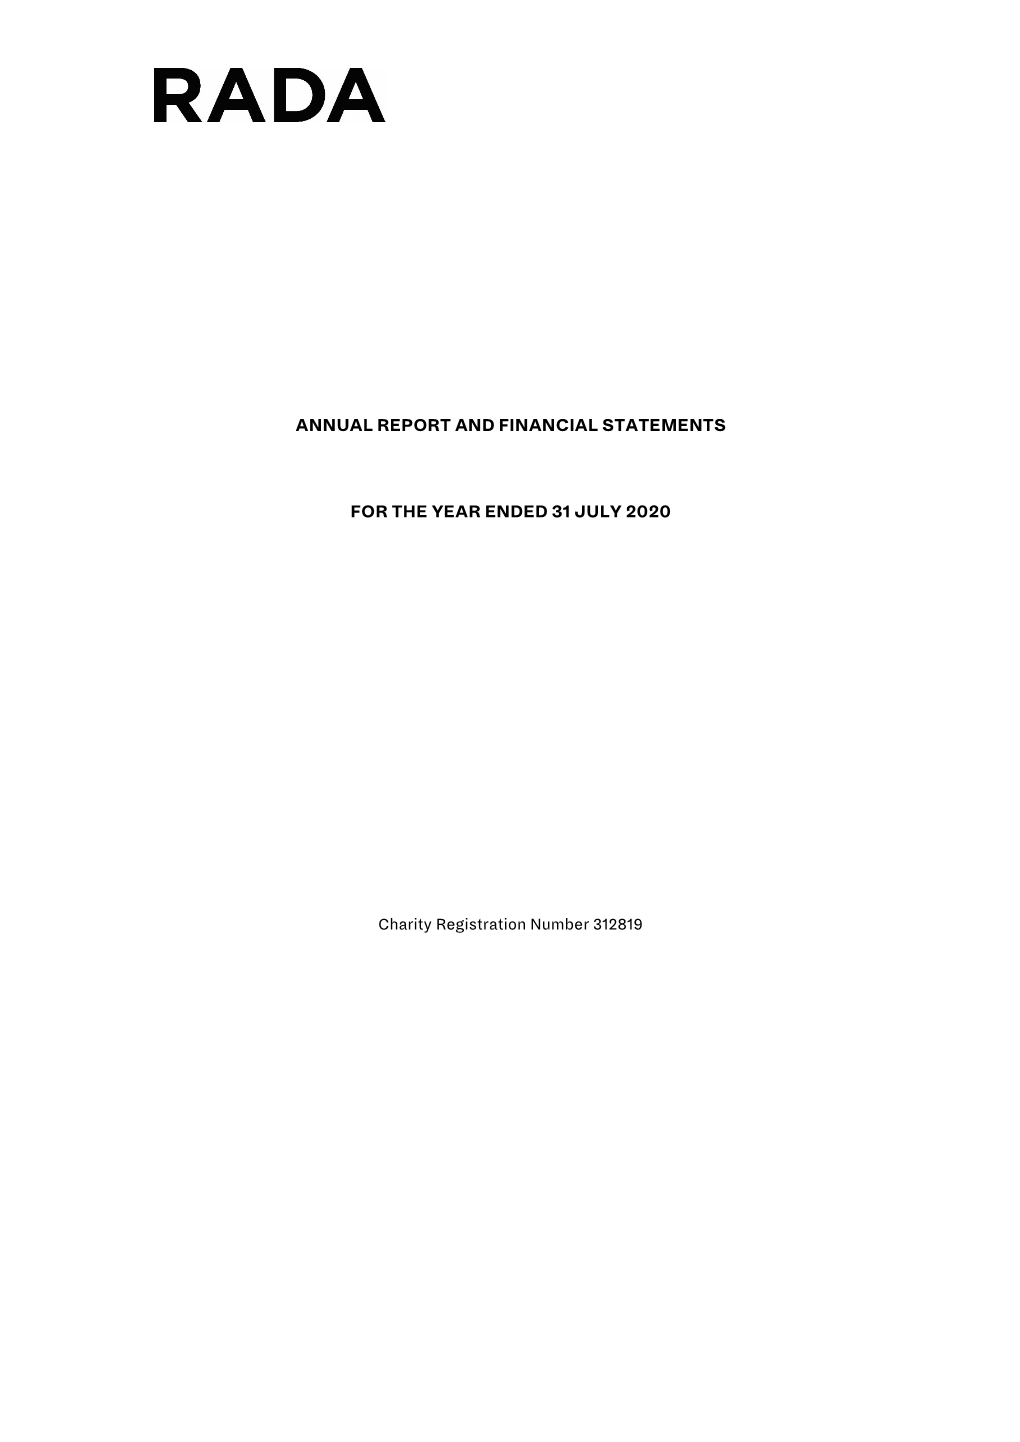 Annual Report and Financial Statements for the Year